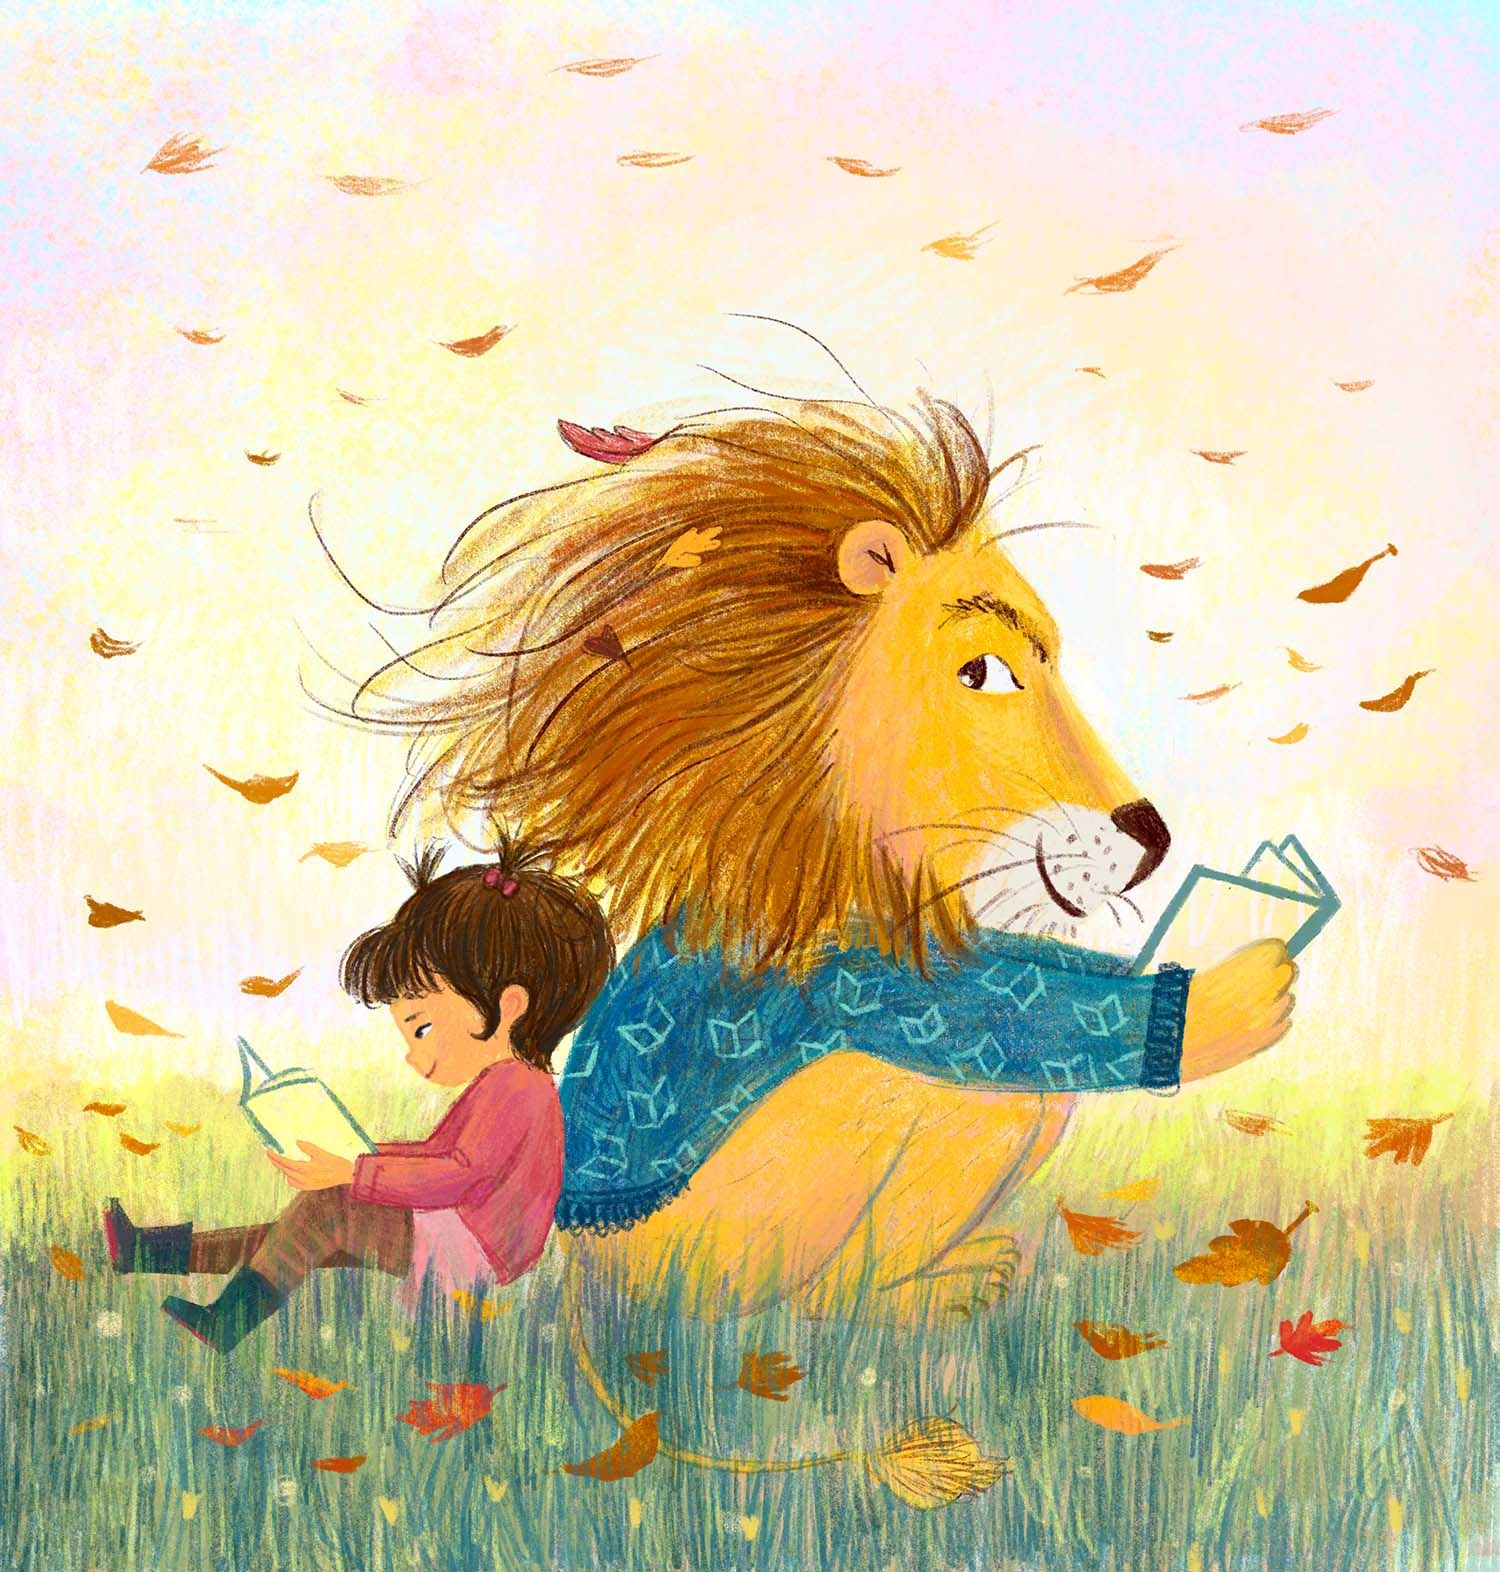 emma and lion_small.jpg